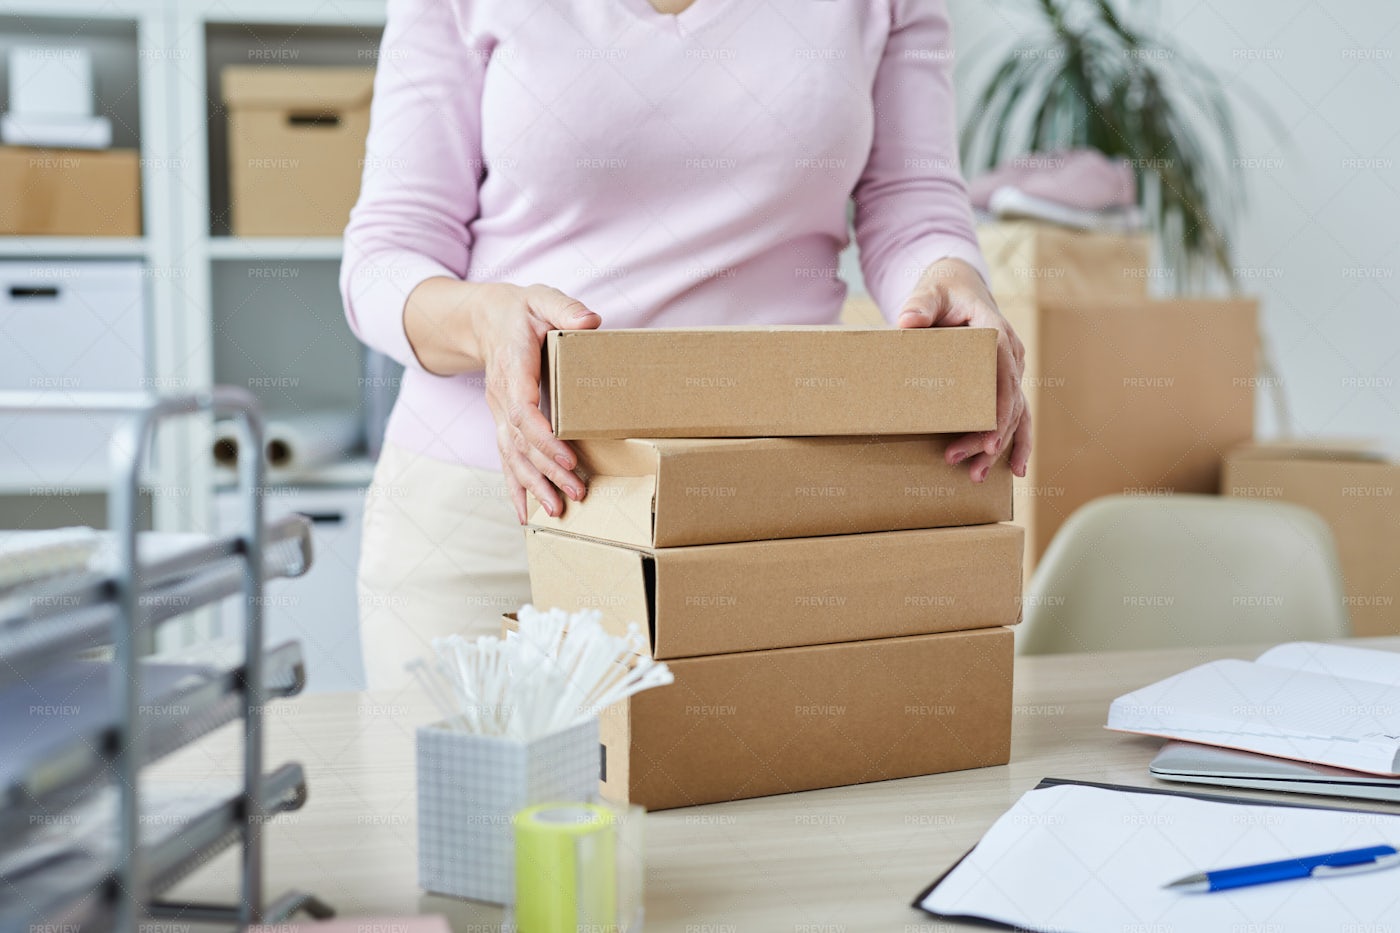 Stack Of Packed Boxes With Orders...: Stock Photos